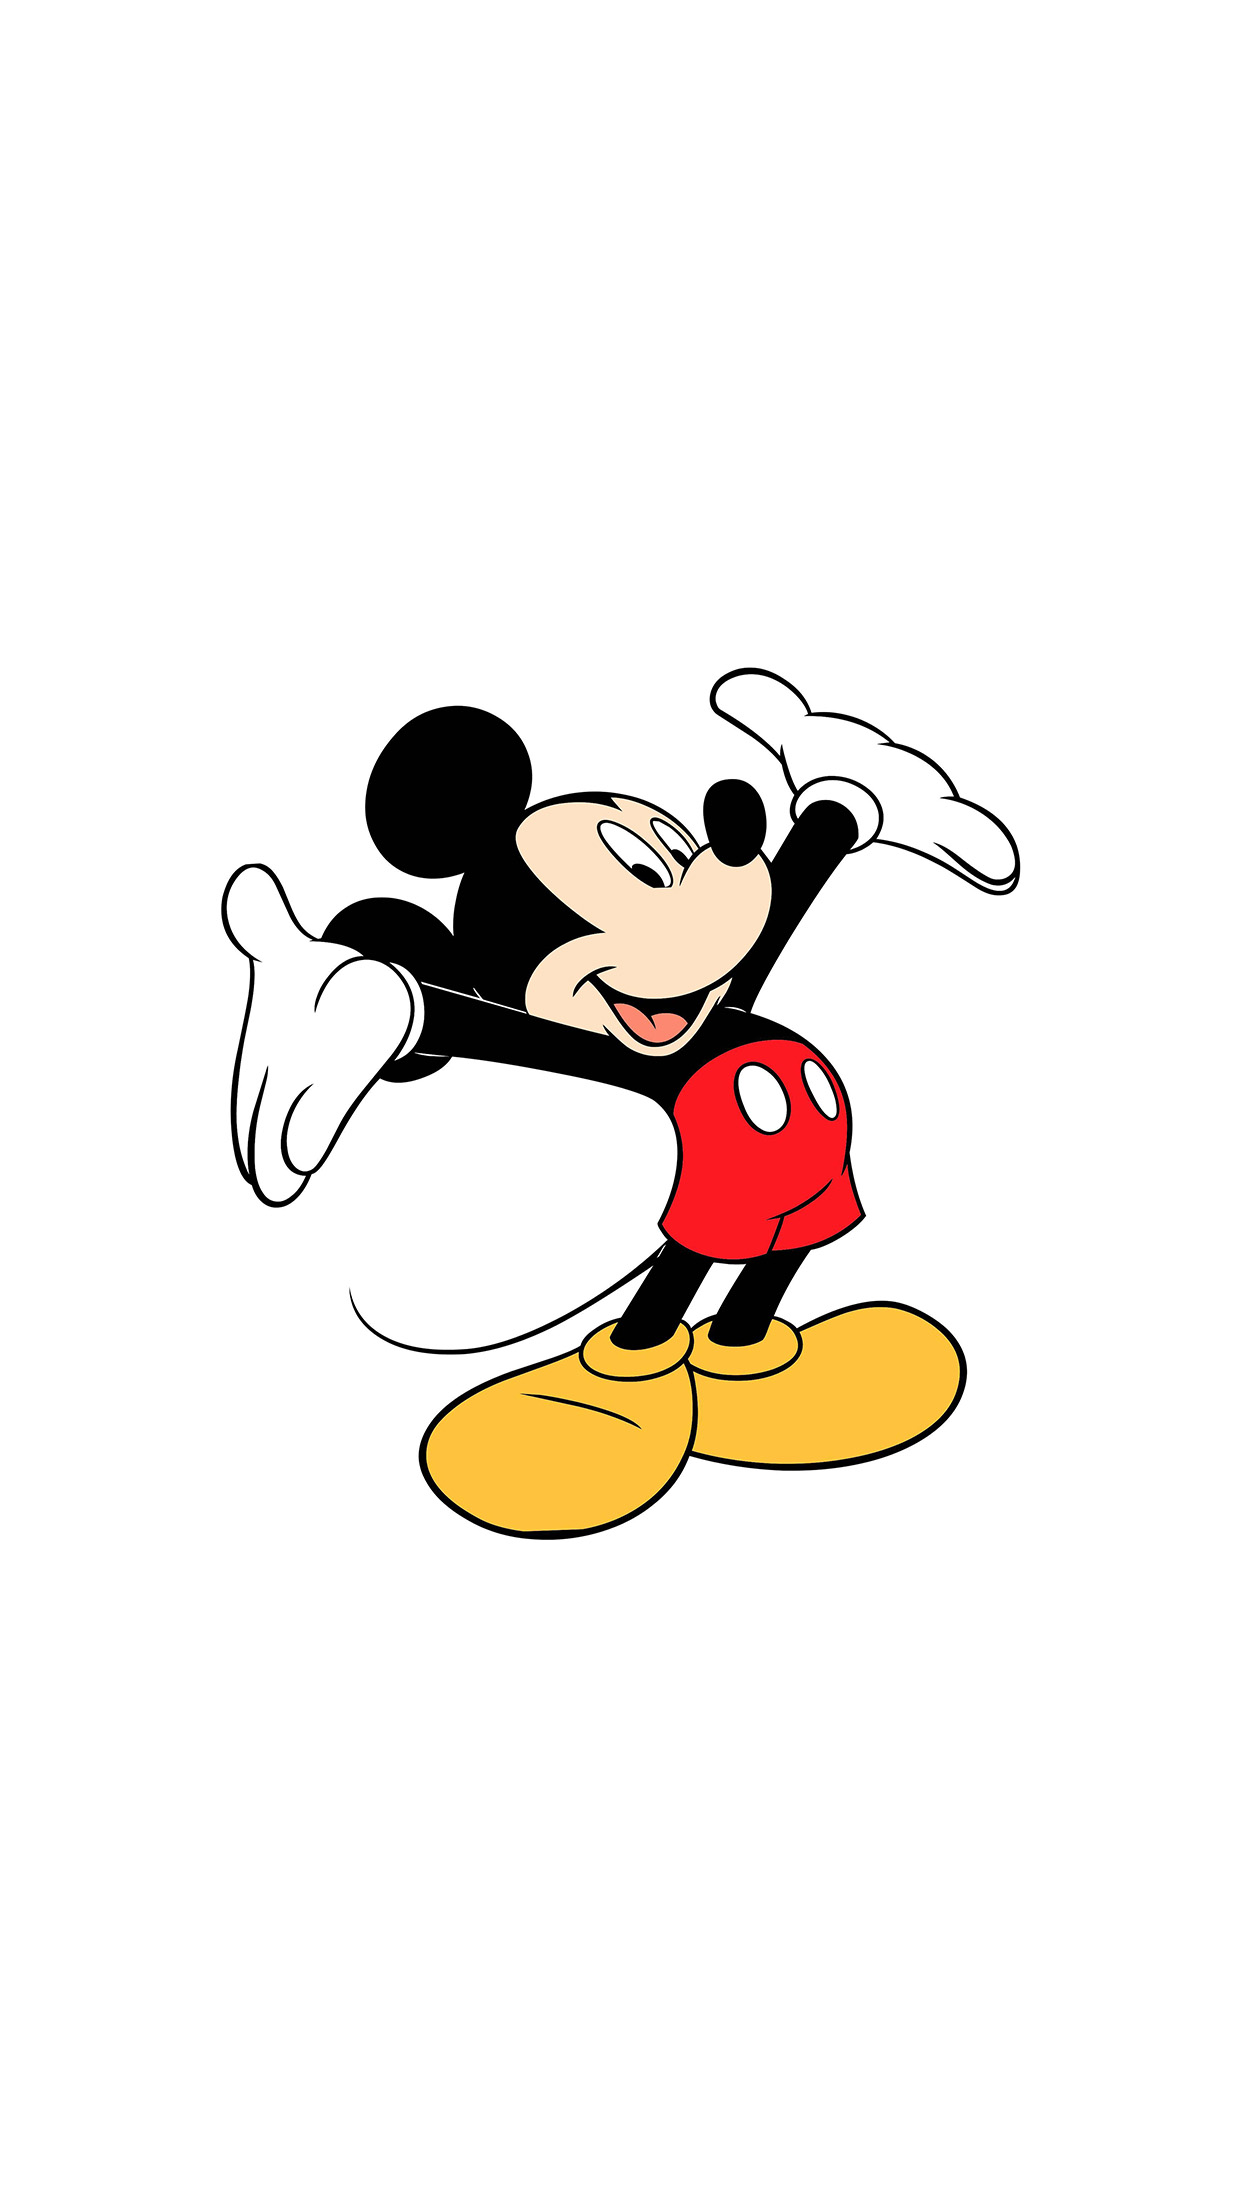 Mickey Mouse Wallpaper Iphone X - HD Wallpaper 